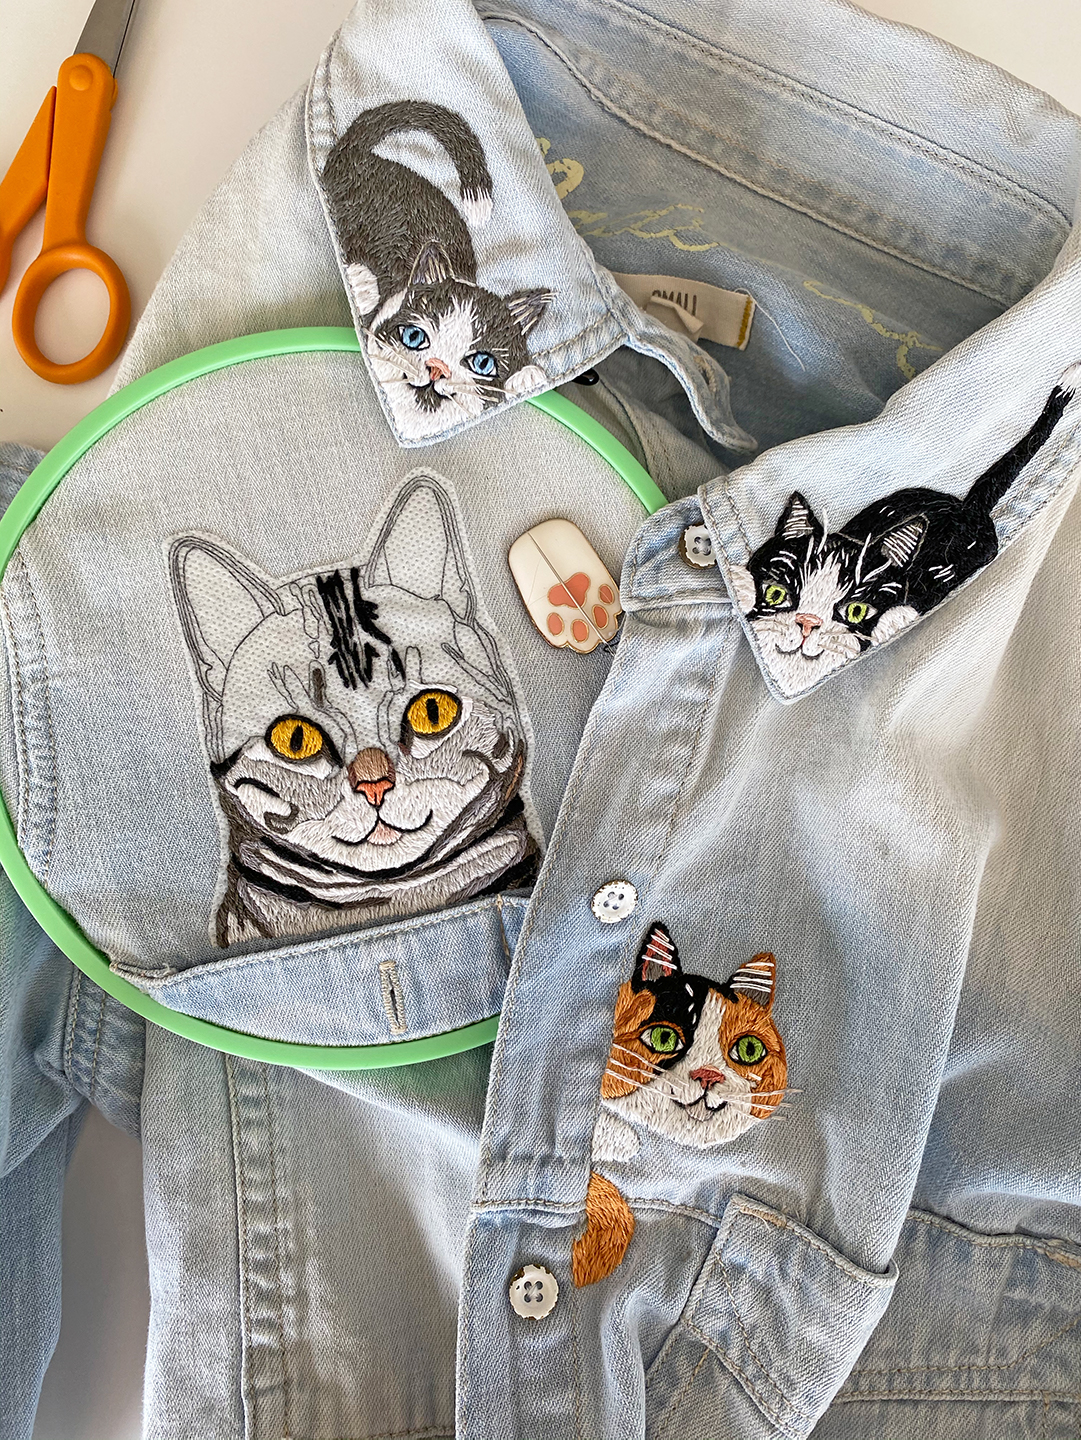 Cat embroidery on a shirt